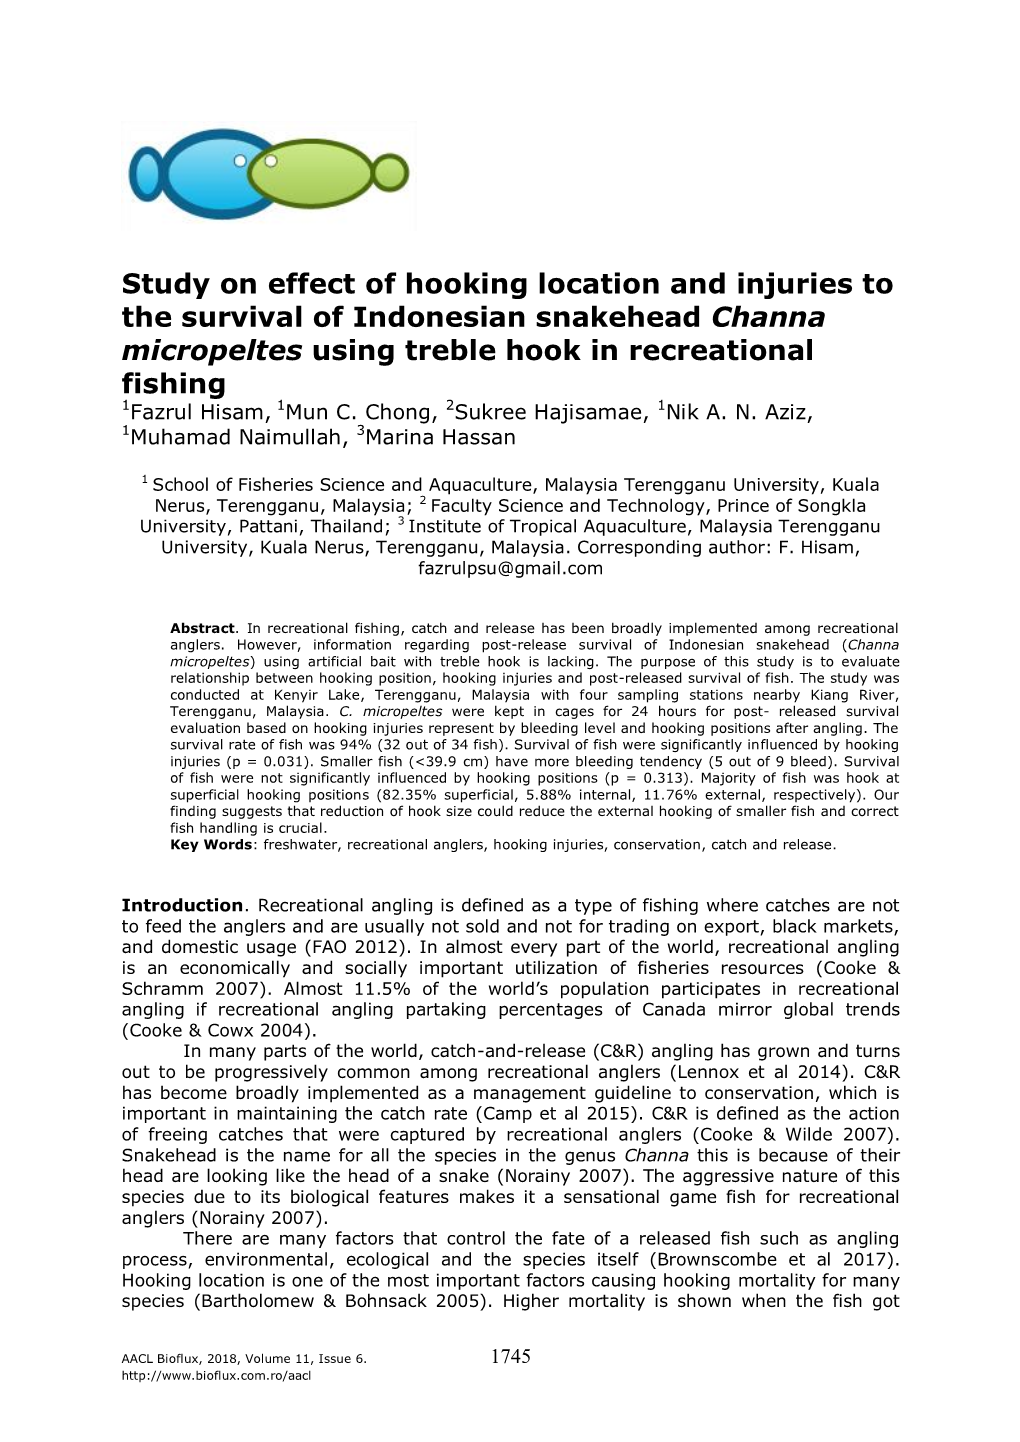 Study on Effect of Hooking Location and Injuries to the Survival Of